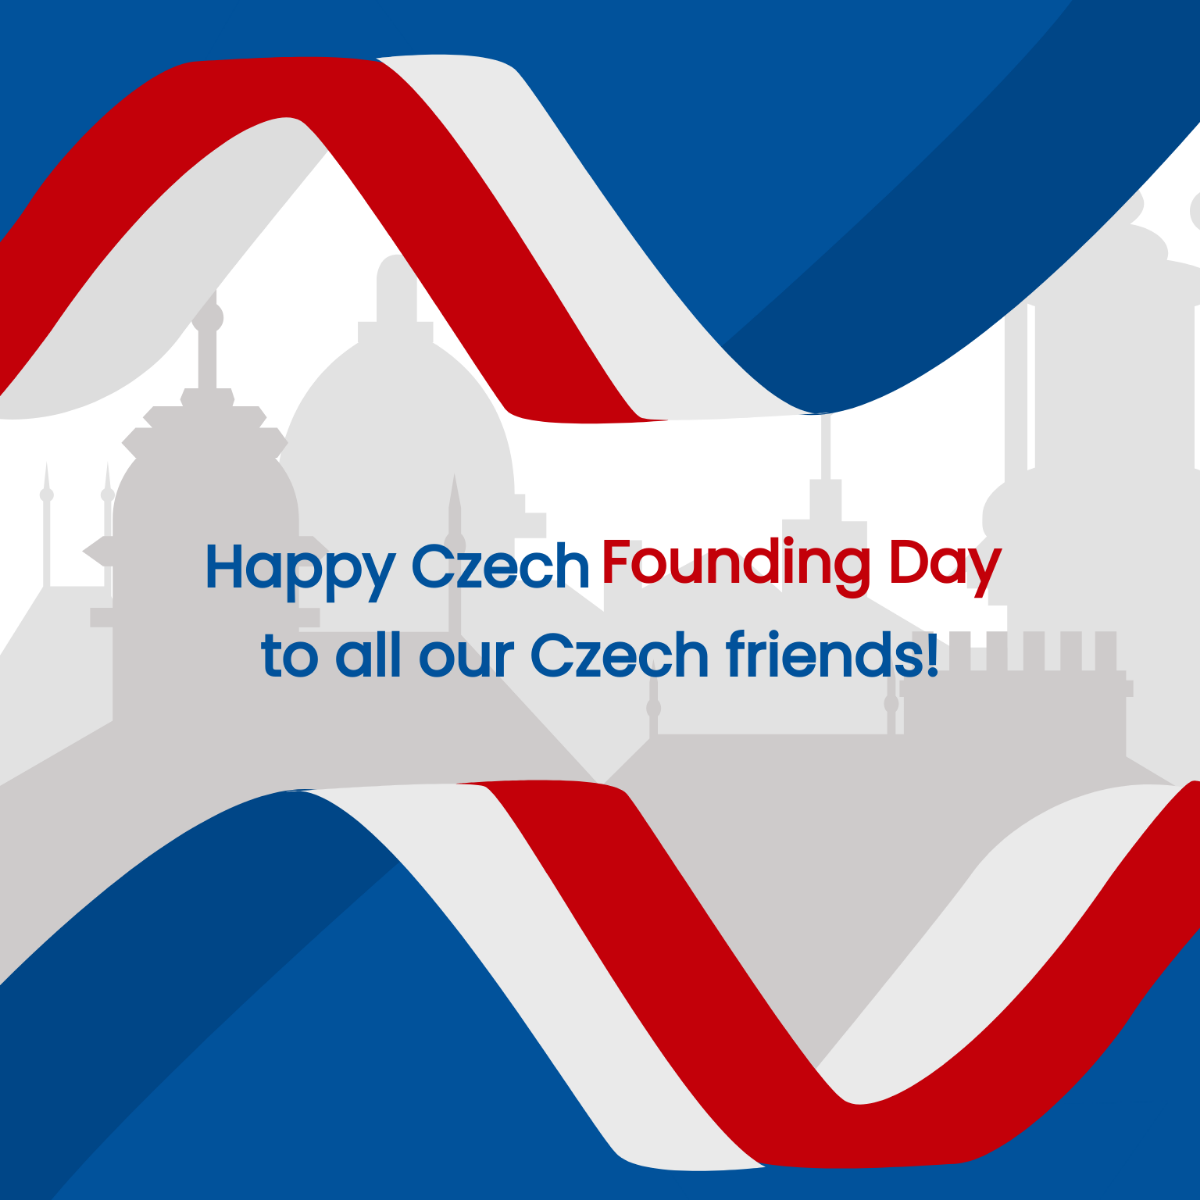 Free Czech Founding Day Greeting Card Vector Template